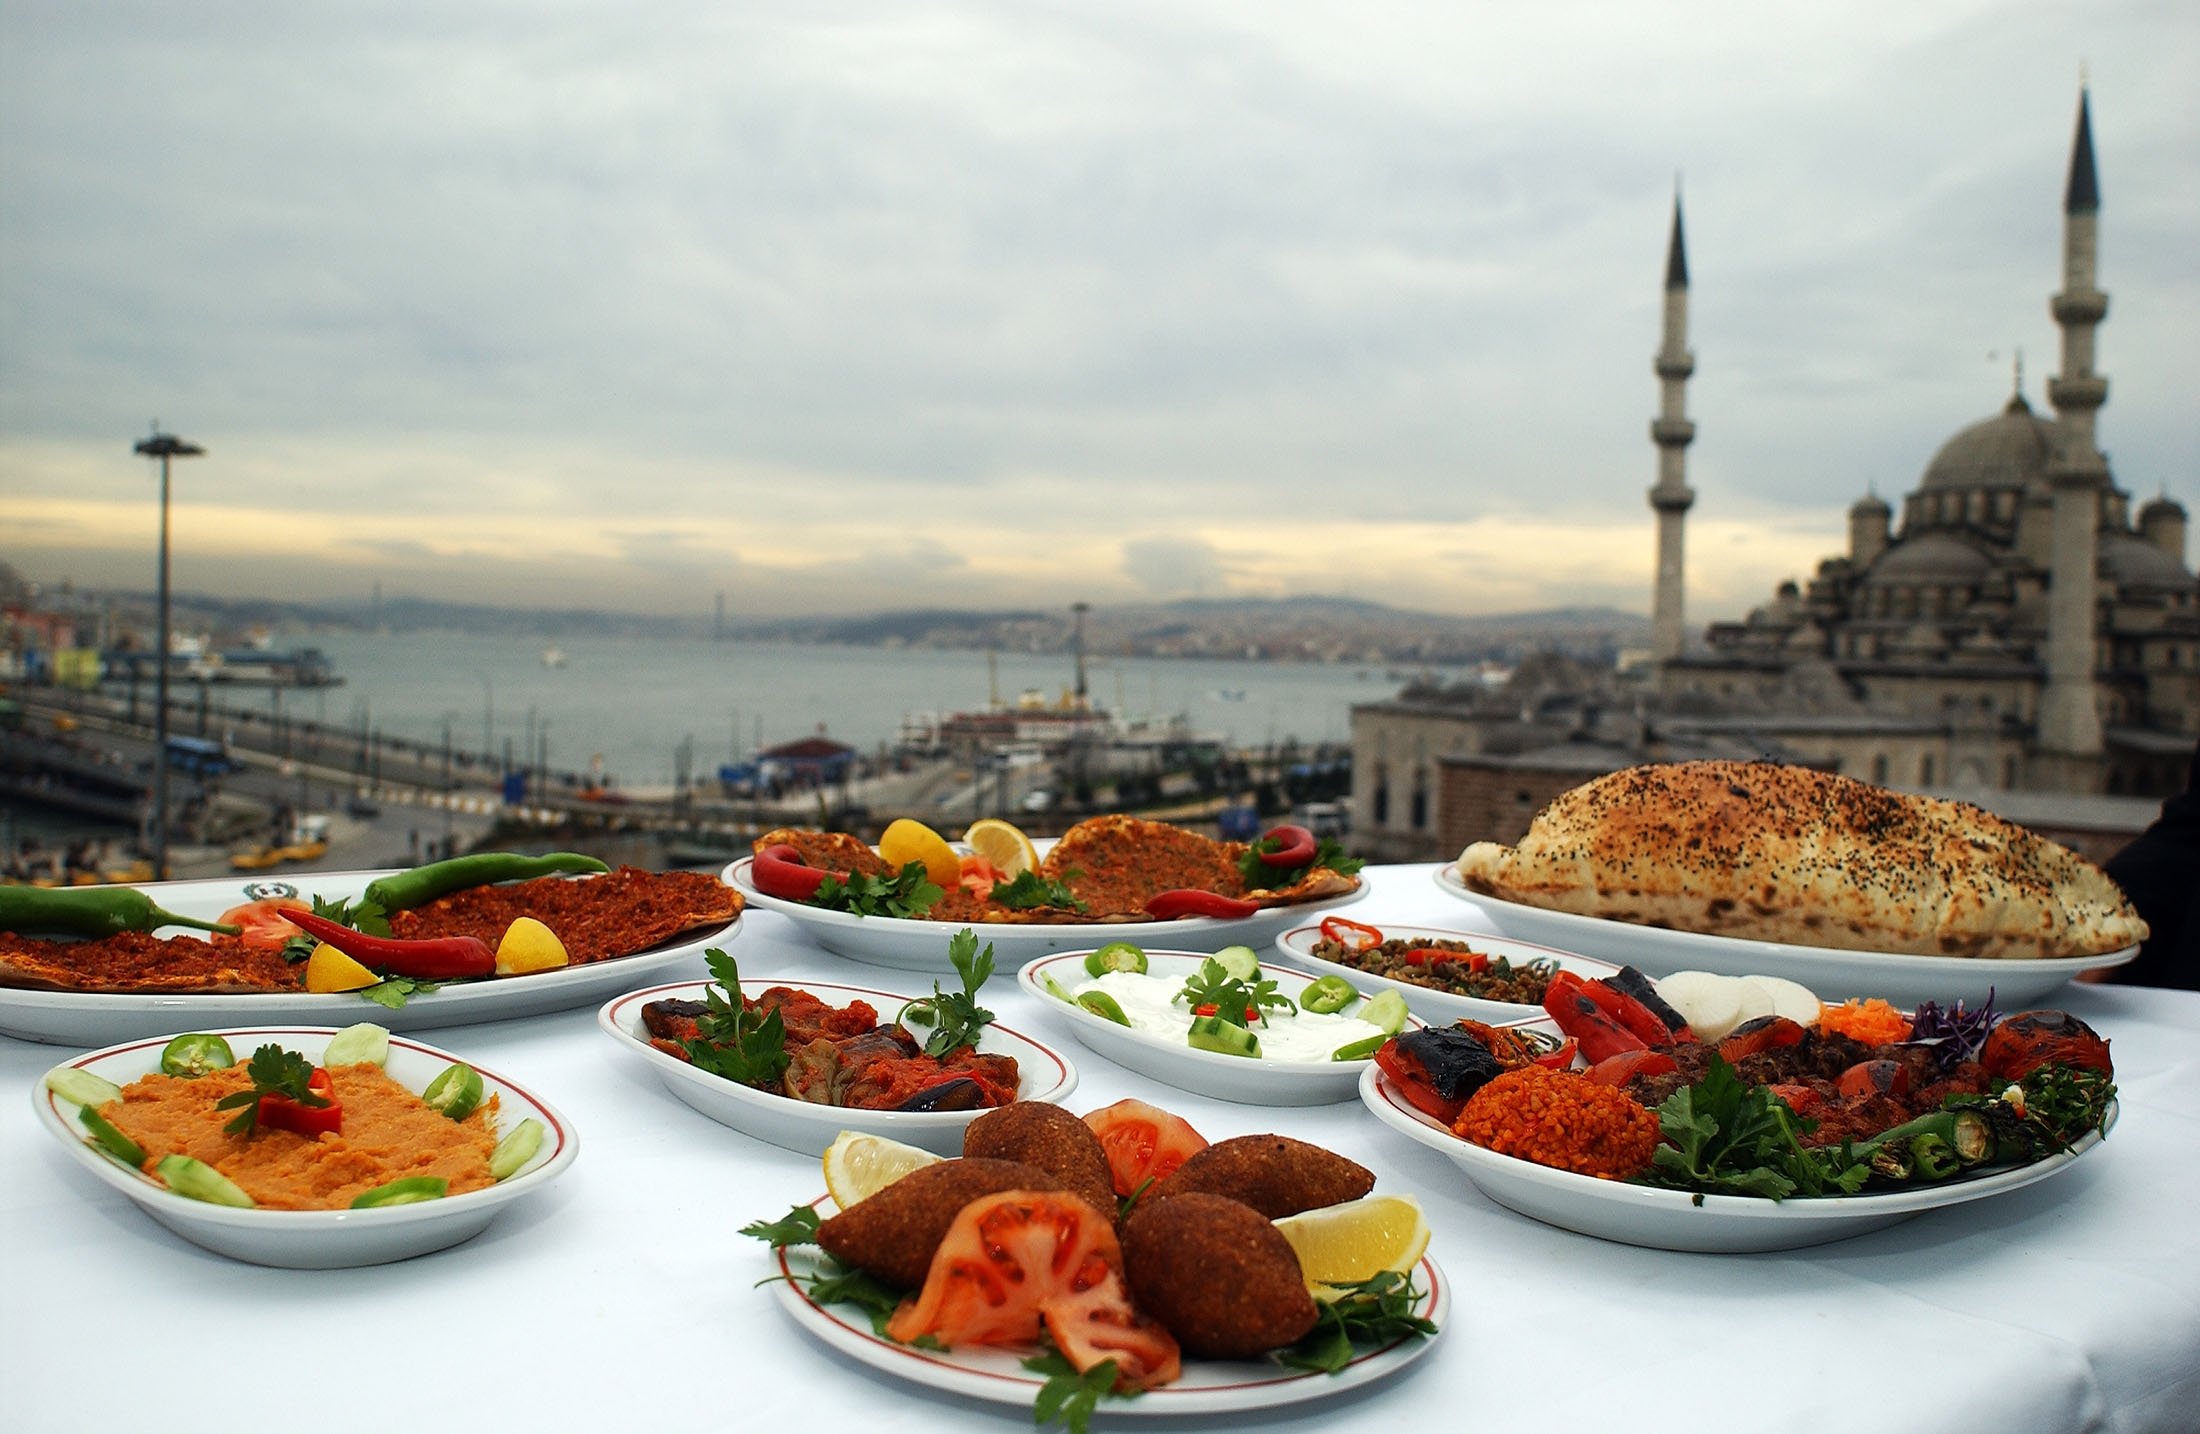 Turkish dishes can be seen with the New Mosque in the background, in Istanbul, Turkey, May 24, 2006. (Shutterstock Photo)